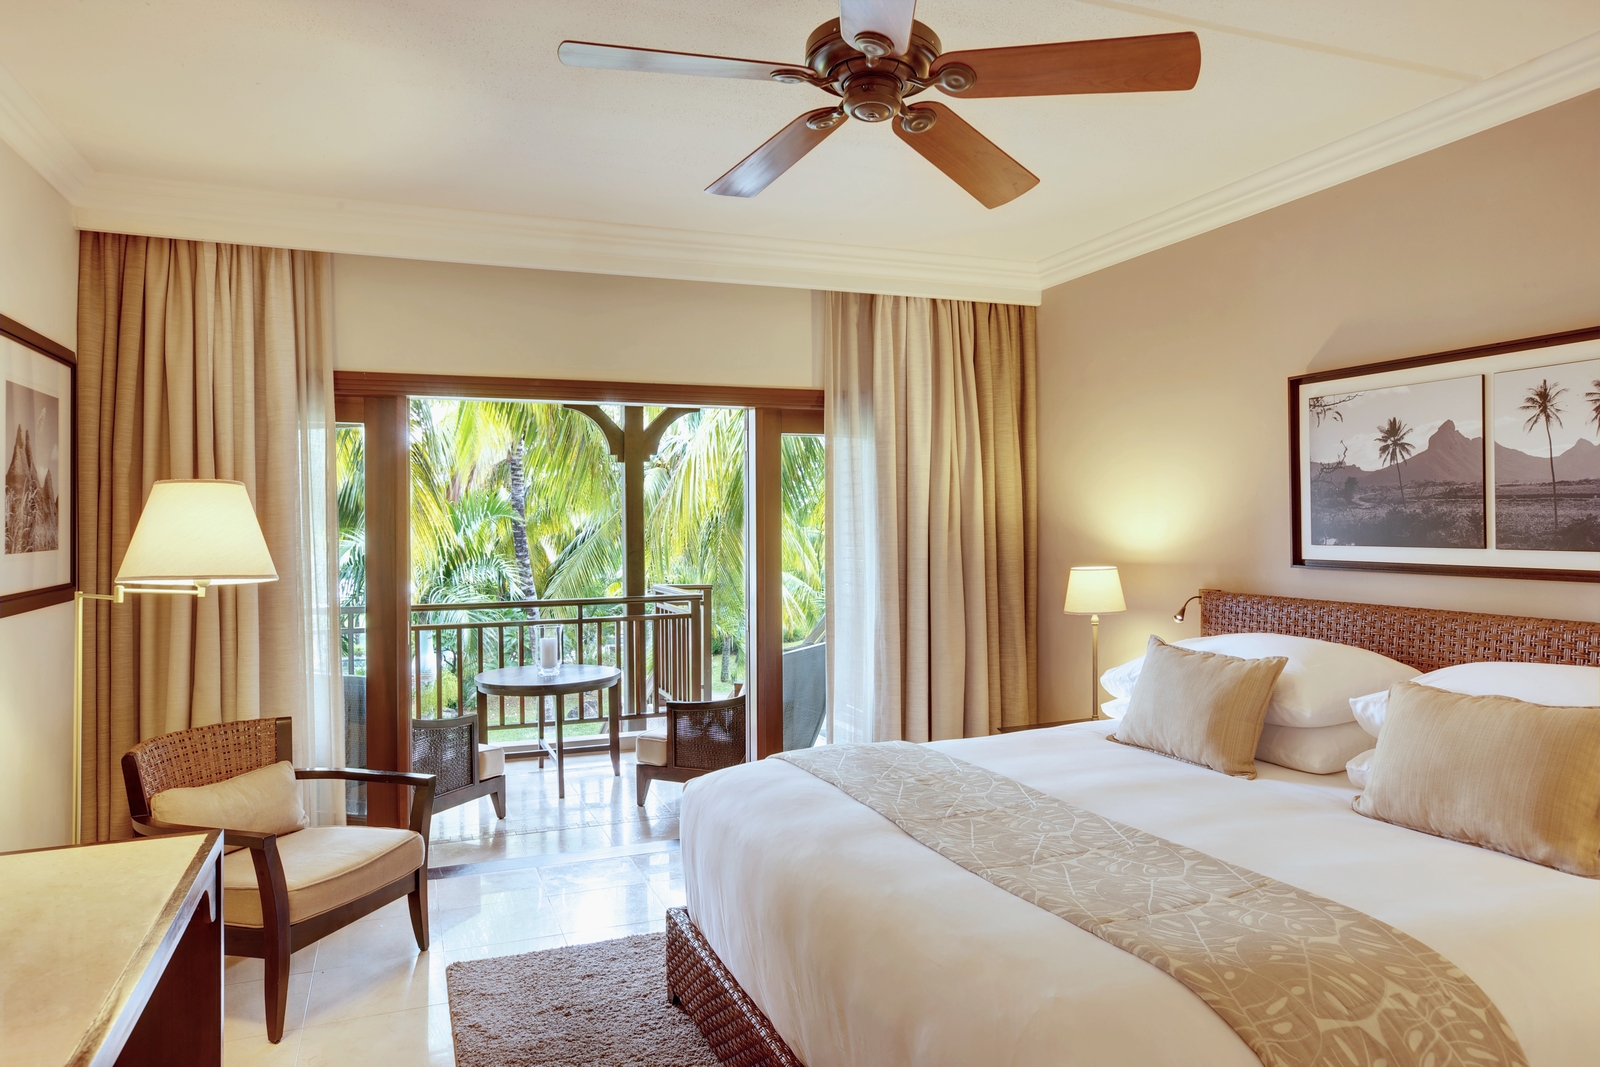 Double bedroom with terrace at LUX* le Morne, Mauritius